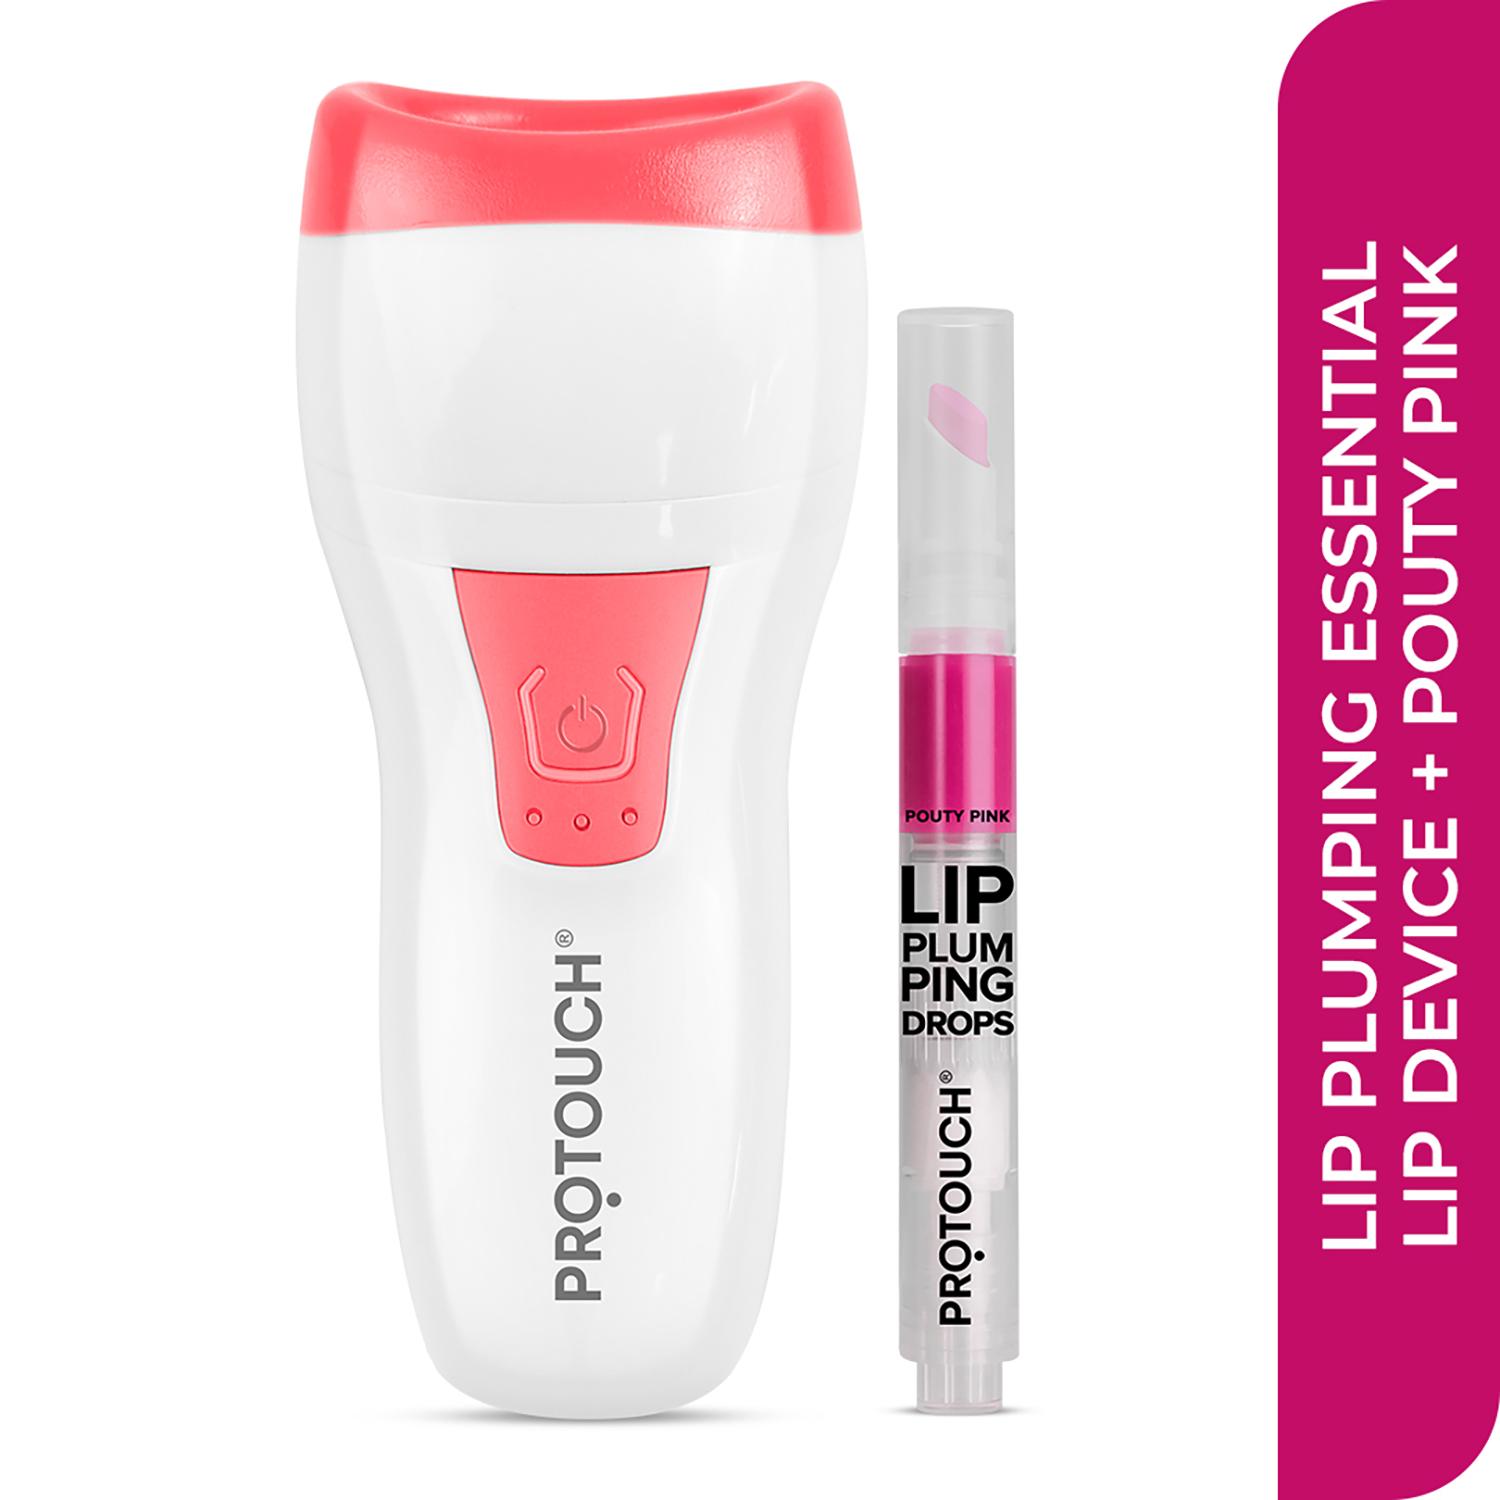 Protouch | Protouch Lip Plumping Essential Pro-lips Lip Plumper Device and Pink Tint Instantly Plumped Lip